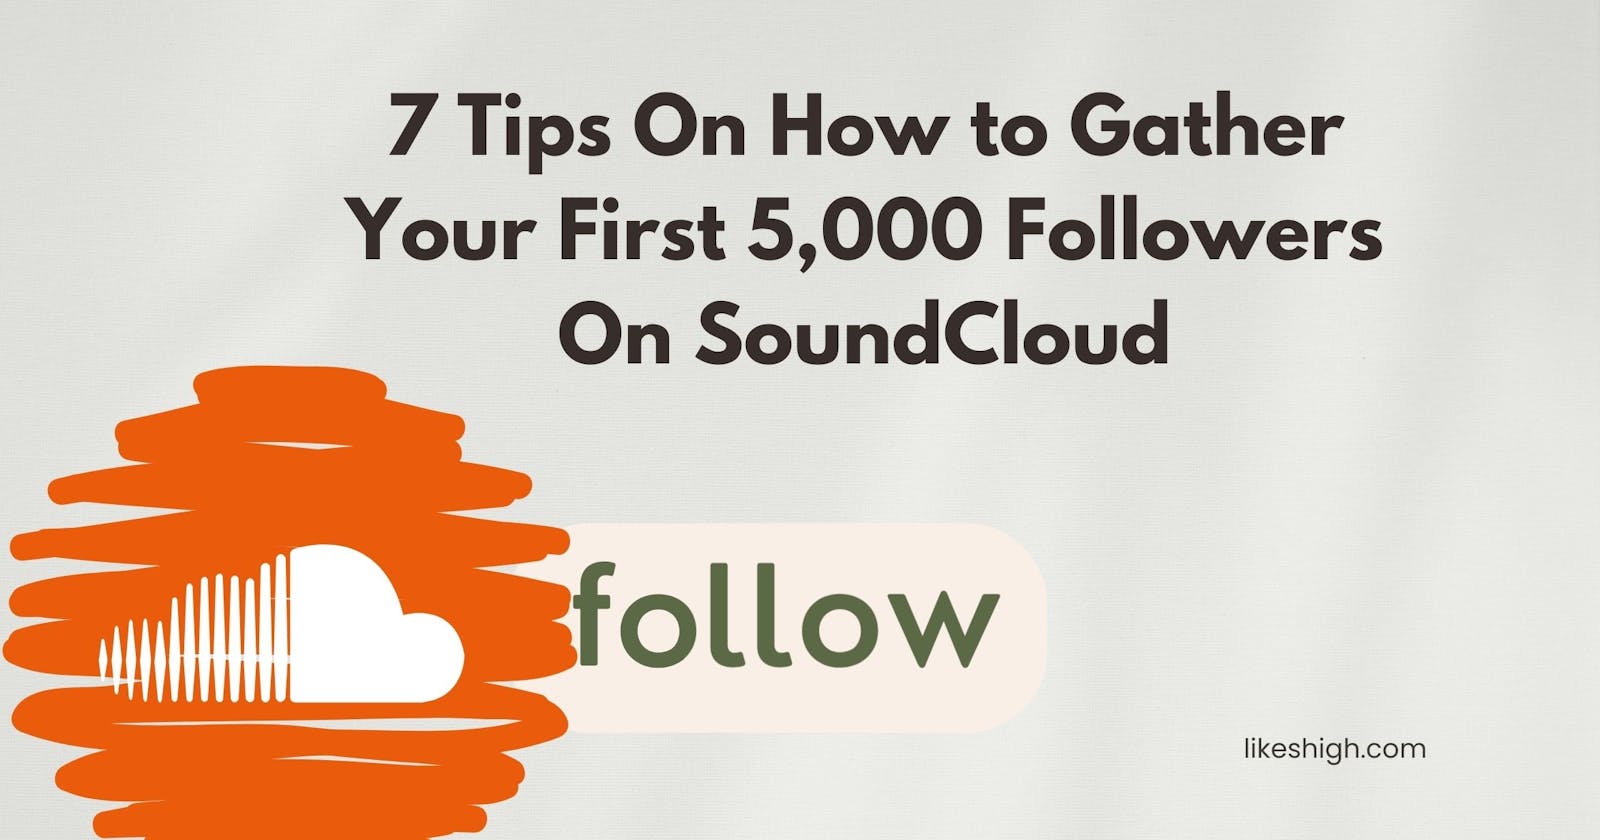 7 Tips On How to Gather Your First 5,000 Followers On SoundCloud